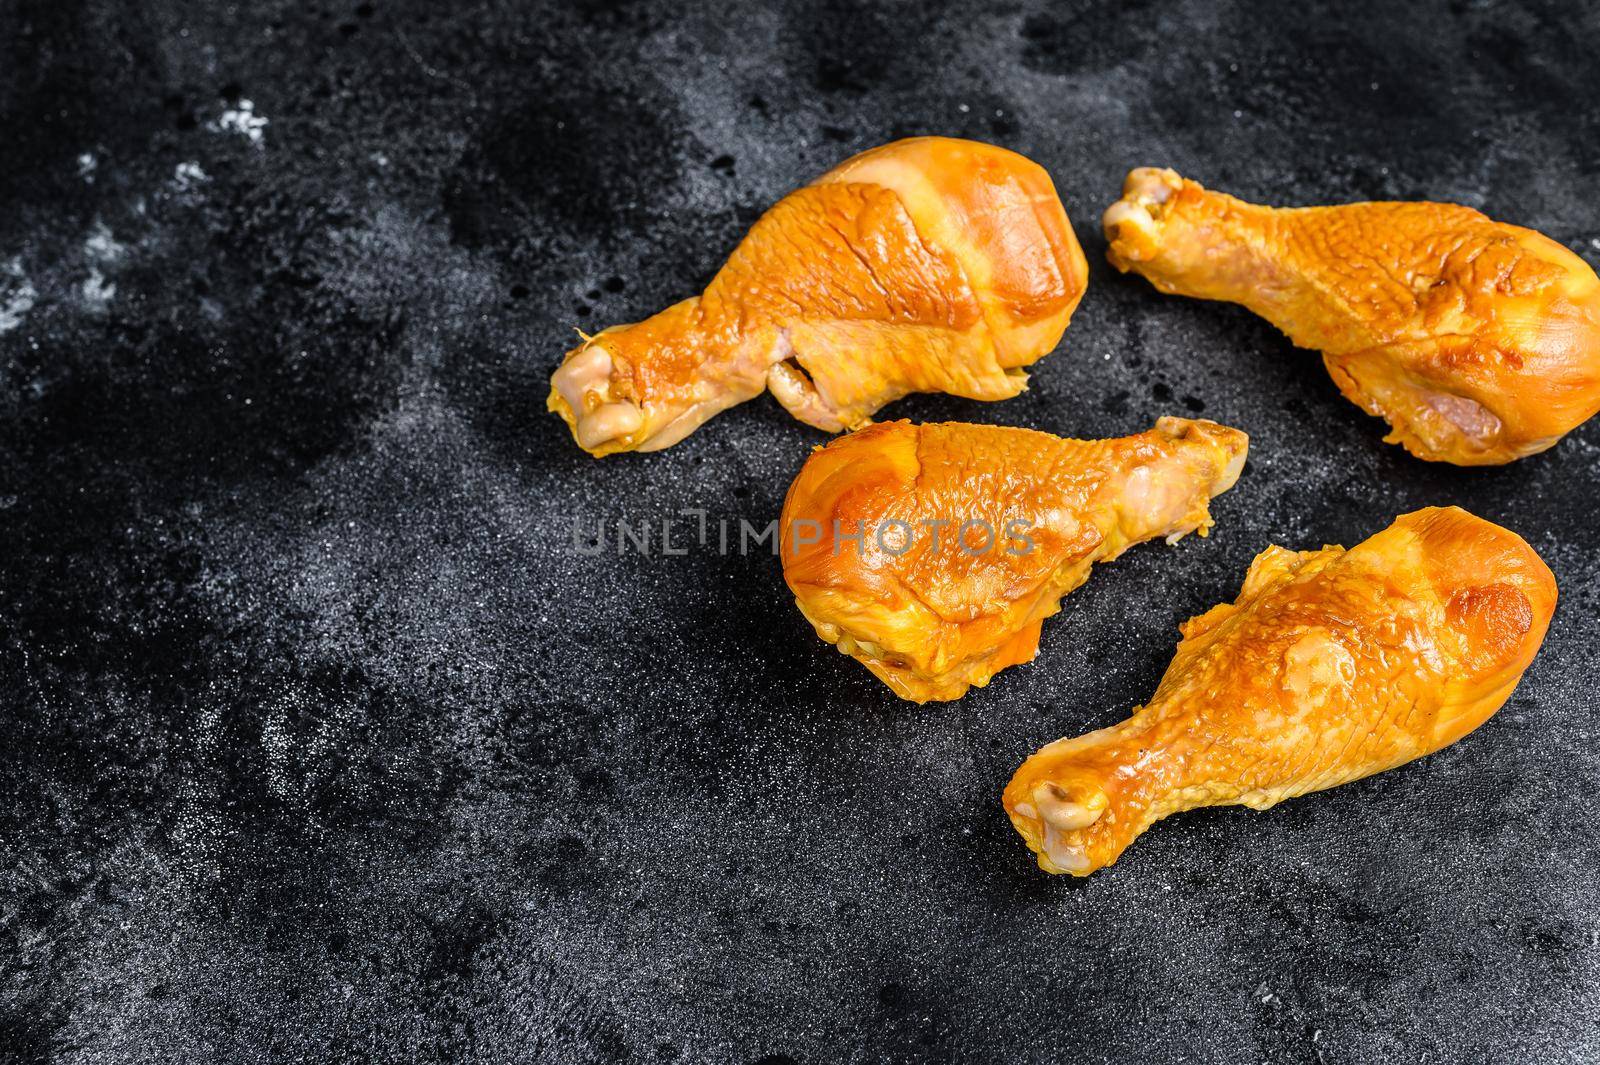 Spicy Smoked chicken leg drumsticks on a kitchen table. Black background. Top view. Copy space.